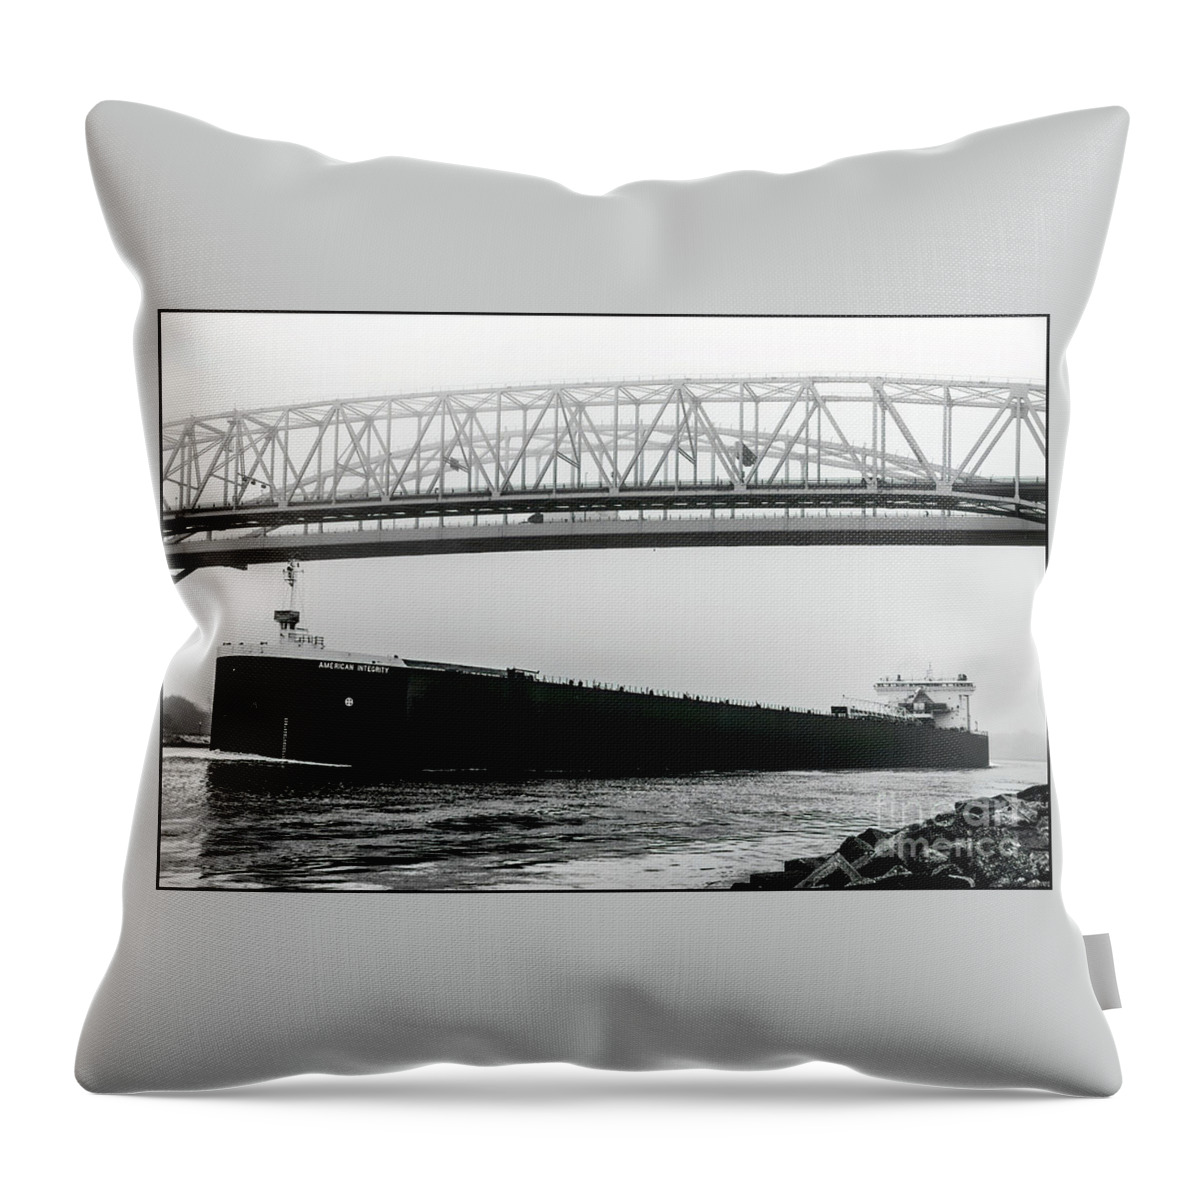 American Integrity Throw Pillow featuring the photograph American Integrity by Randy J Heath